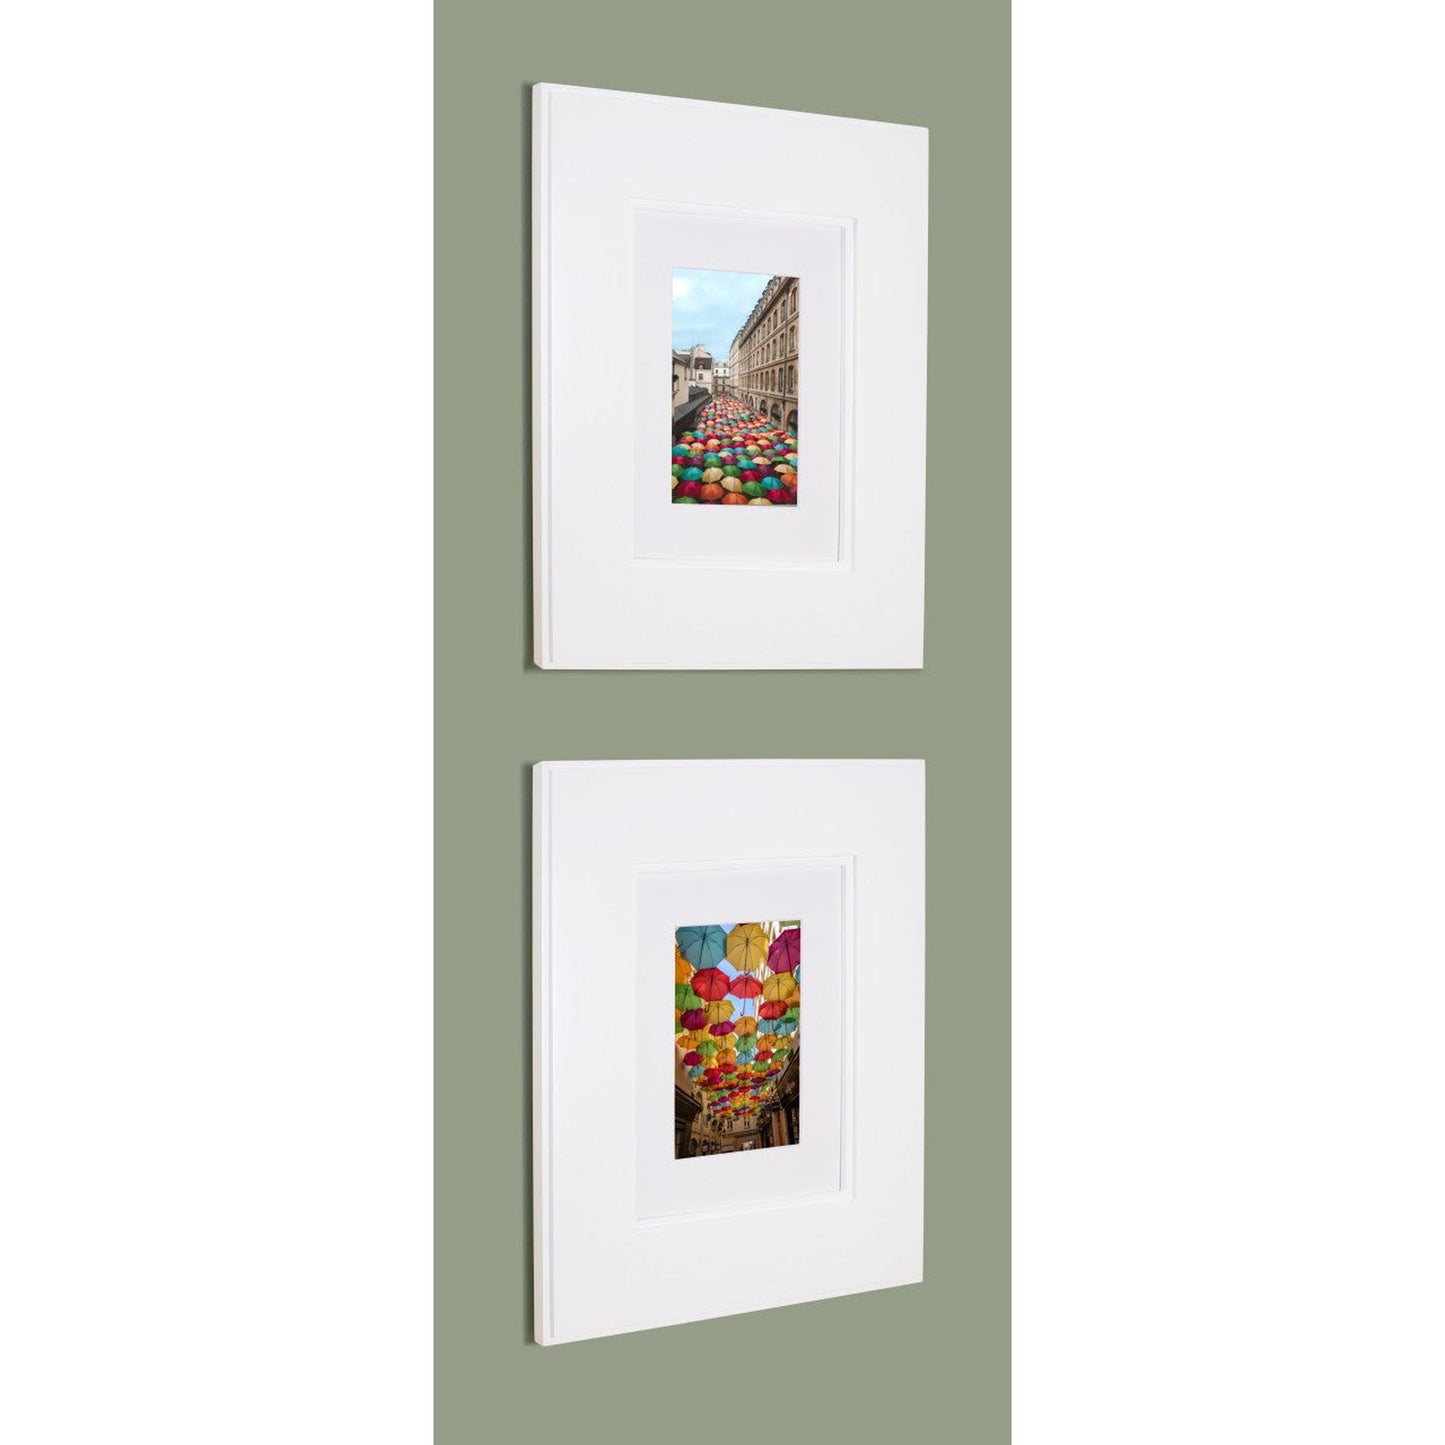 Fox Hollow Furnishings 11" x 14" White Compact Portrait Shaker Standard Depth Recessed Picture Frame Medicine Cabinet With Mirror and Ivory Matting